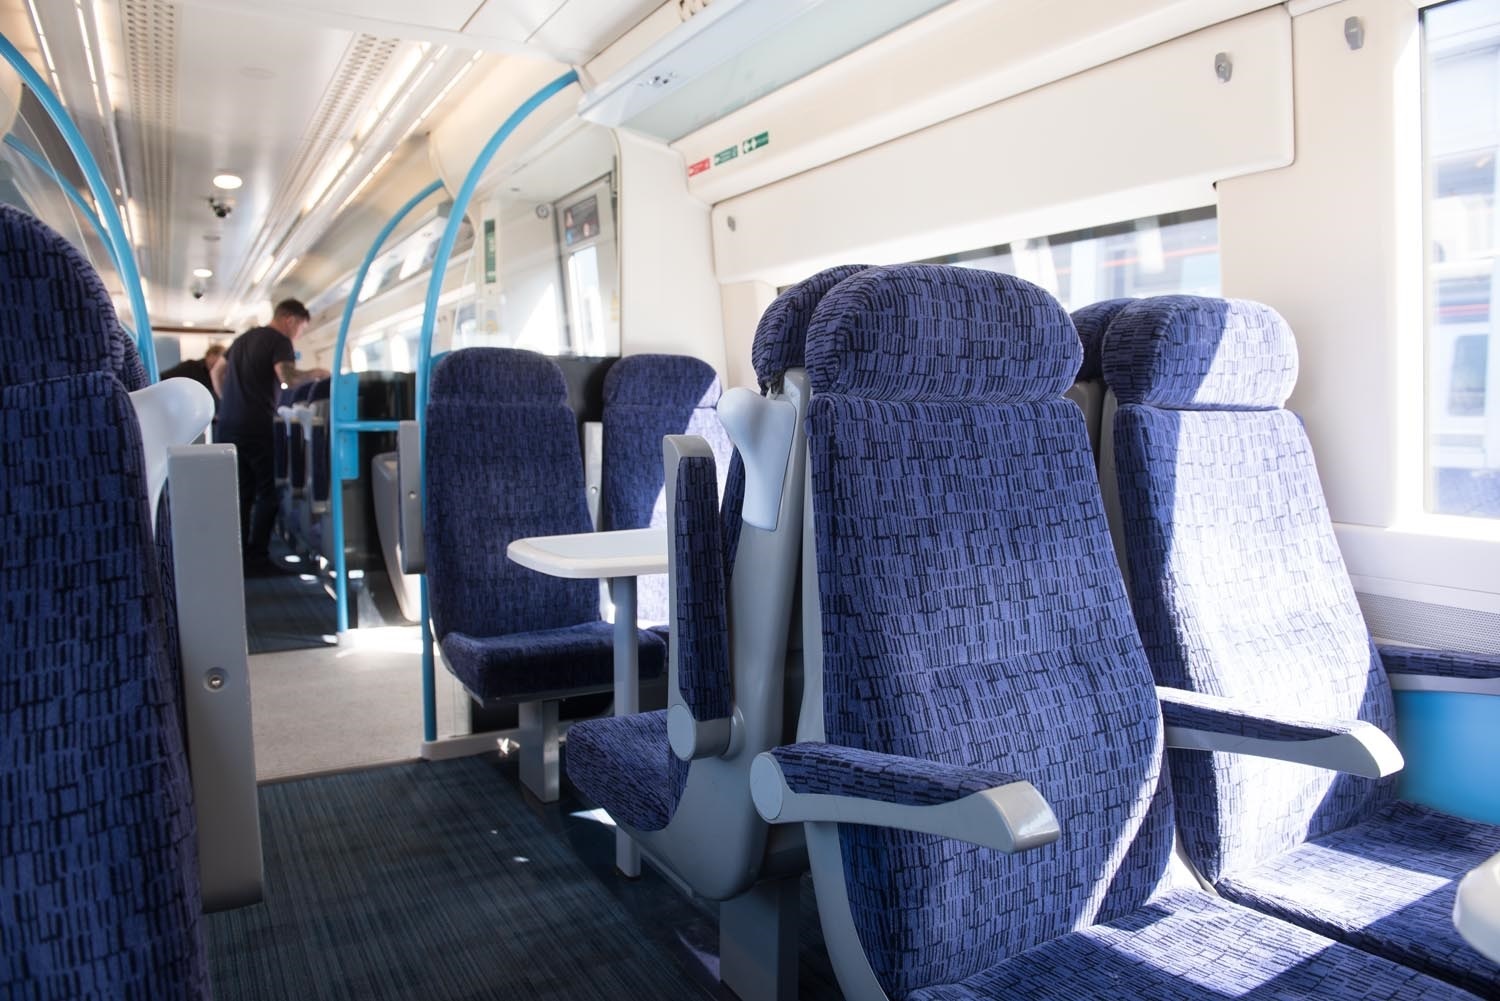 Southeastern completes £30m upgrade to a third of its trains 